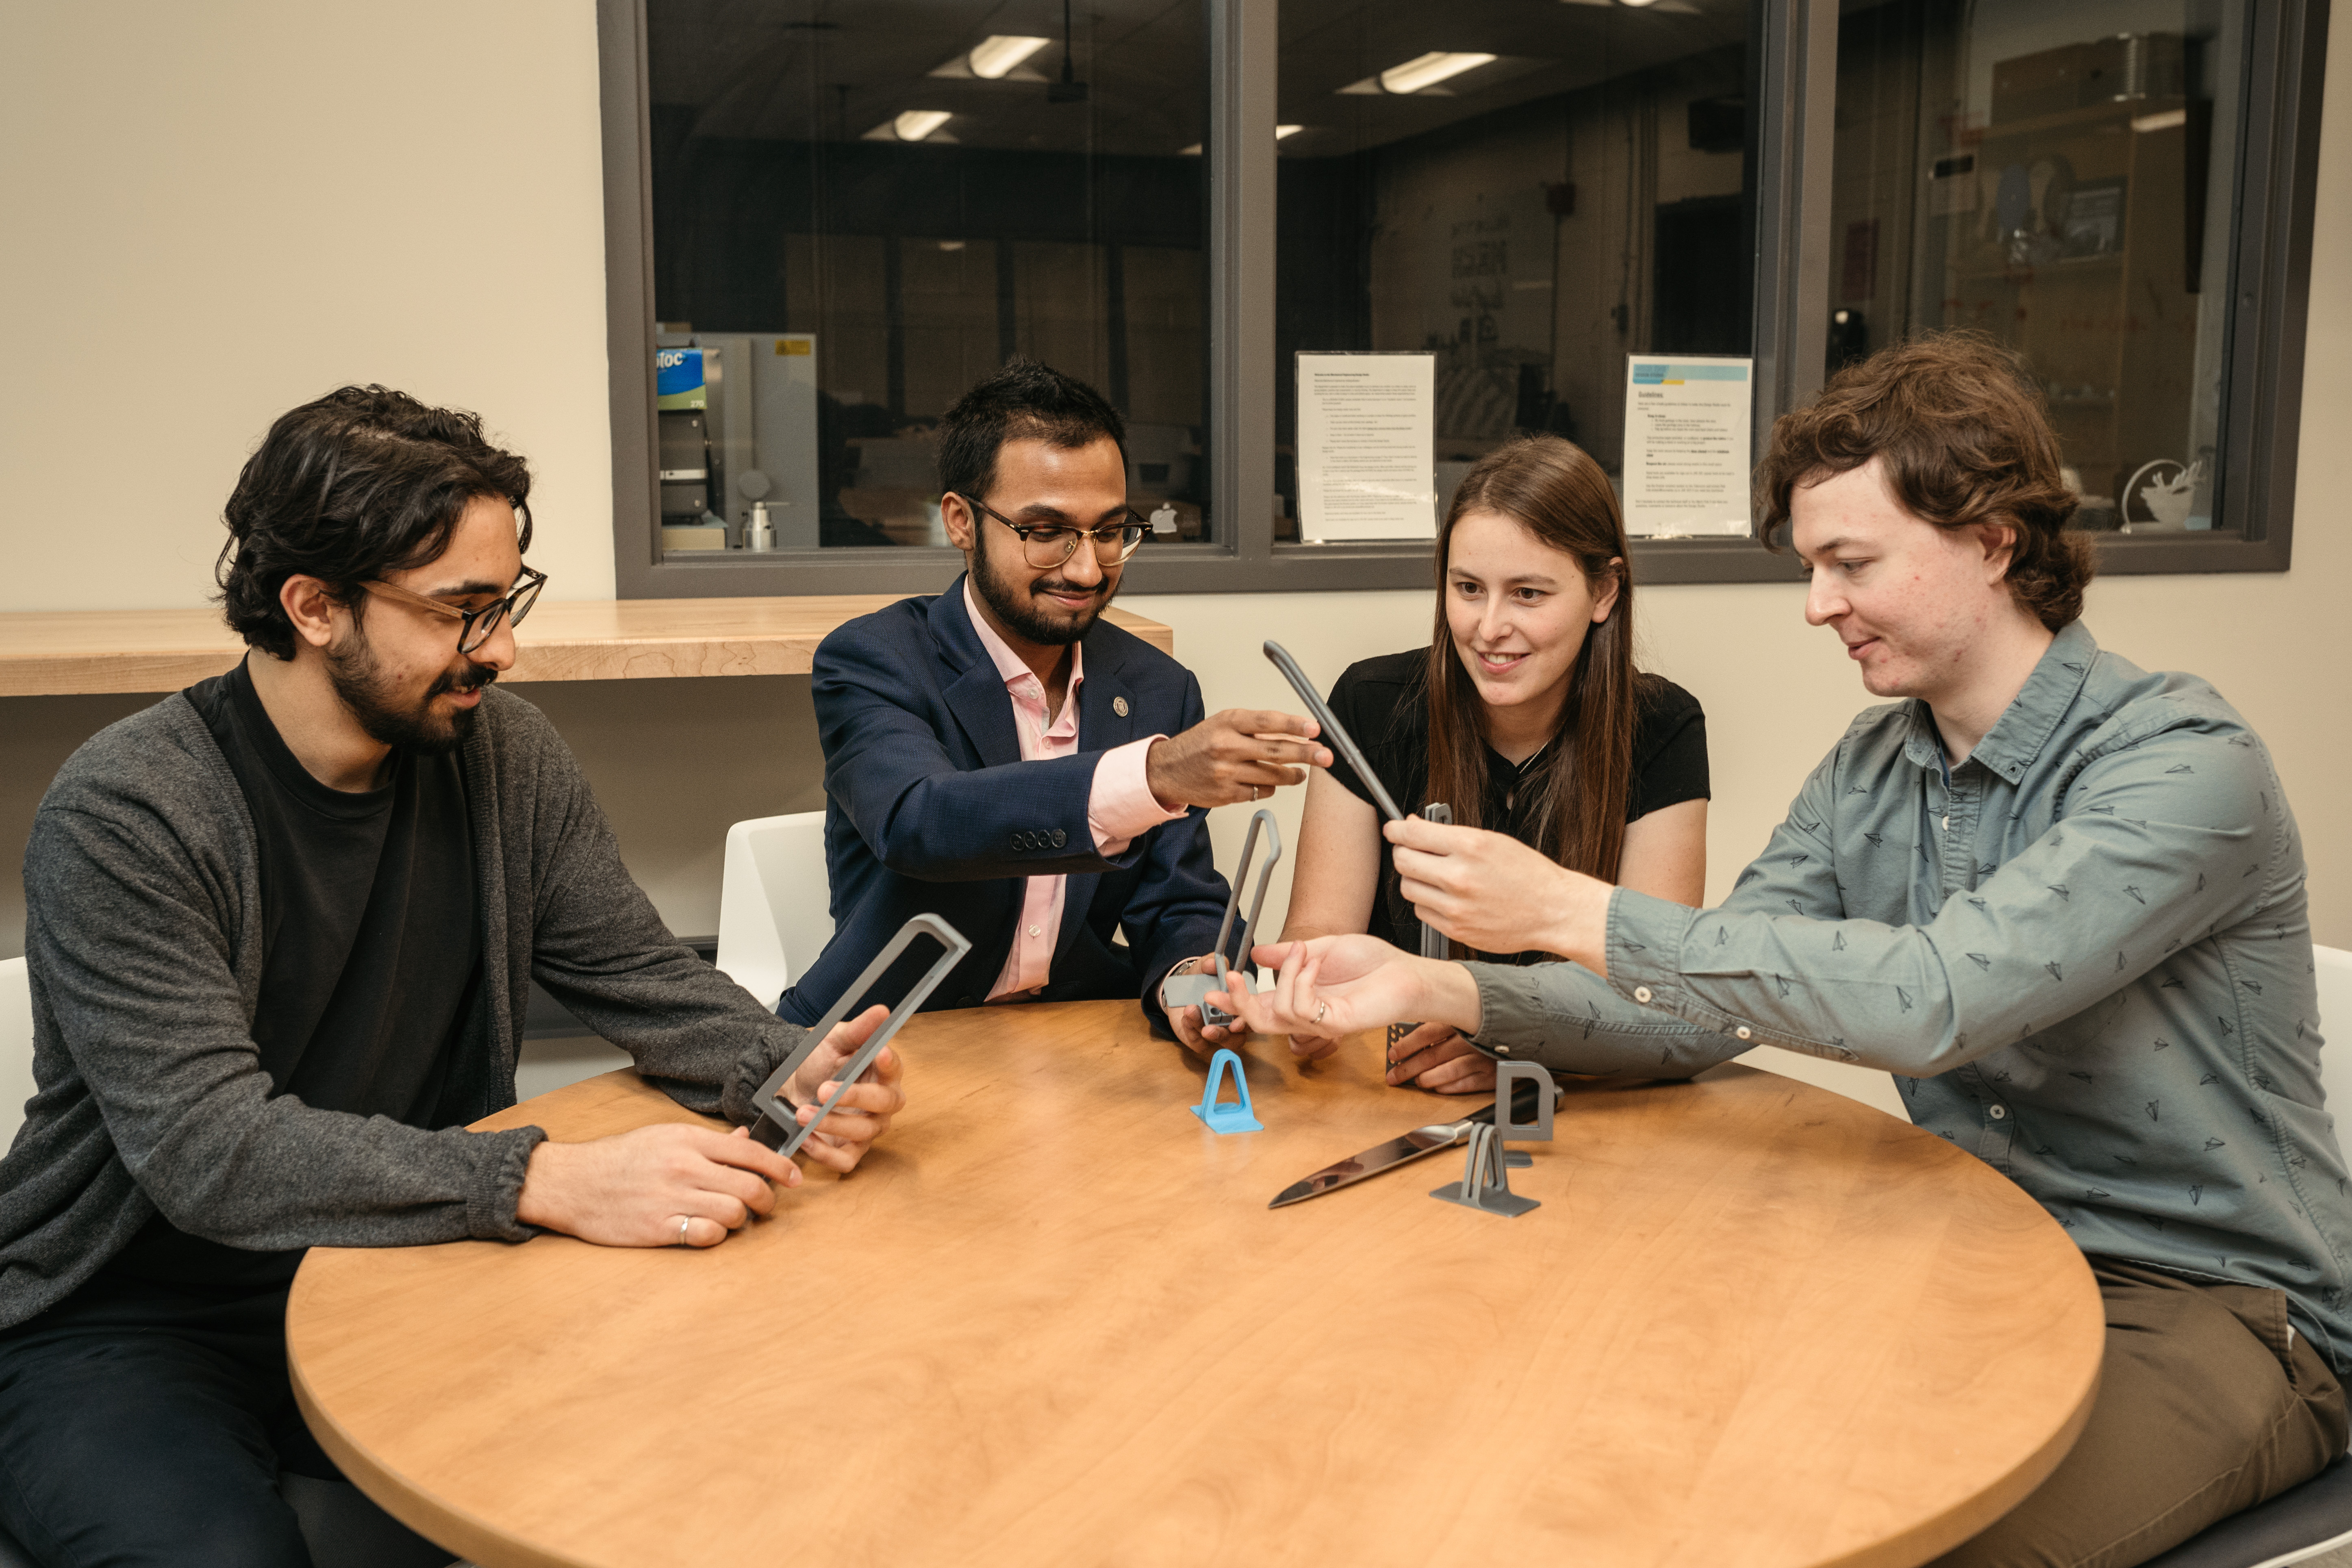 Eden Lazar, Afeef Khan, Caitlyn Kuzler and Clayton MacNeil sitting around a table looking at and holding pieces of what appear to be their assistive knife device. 